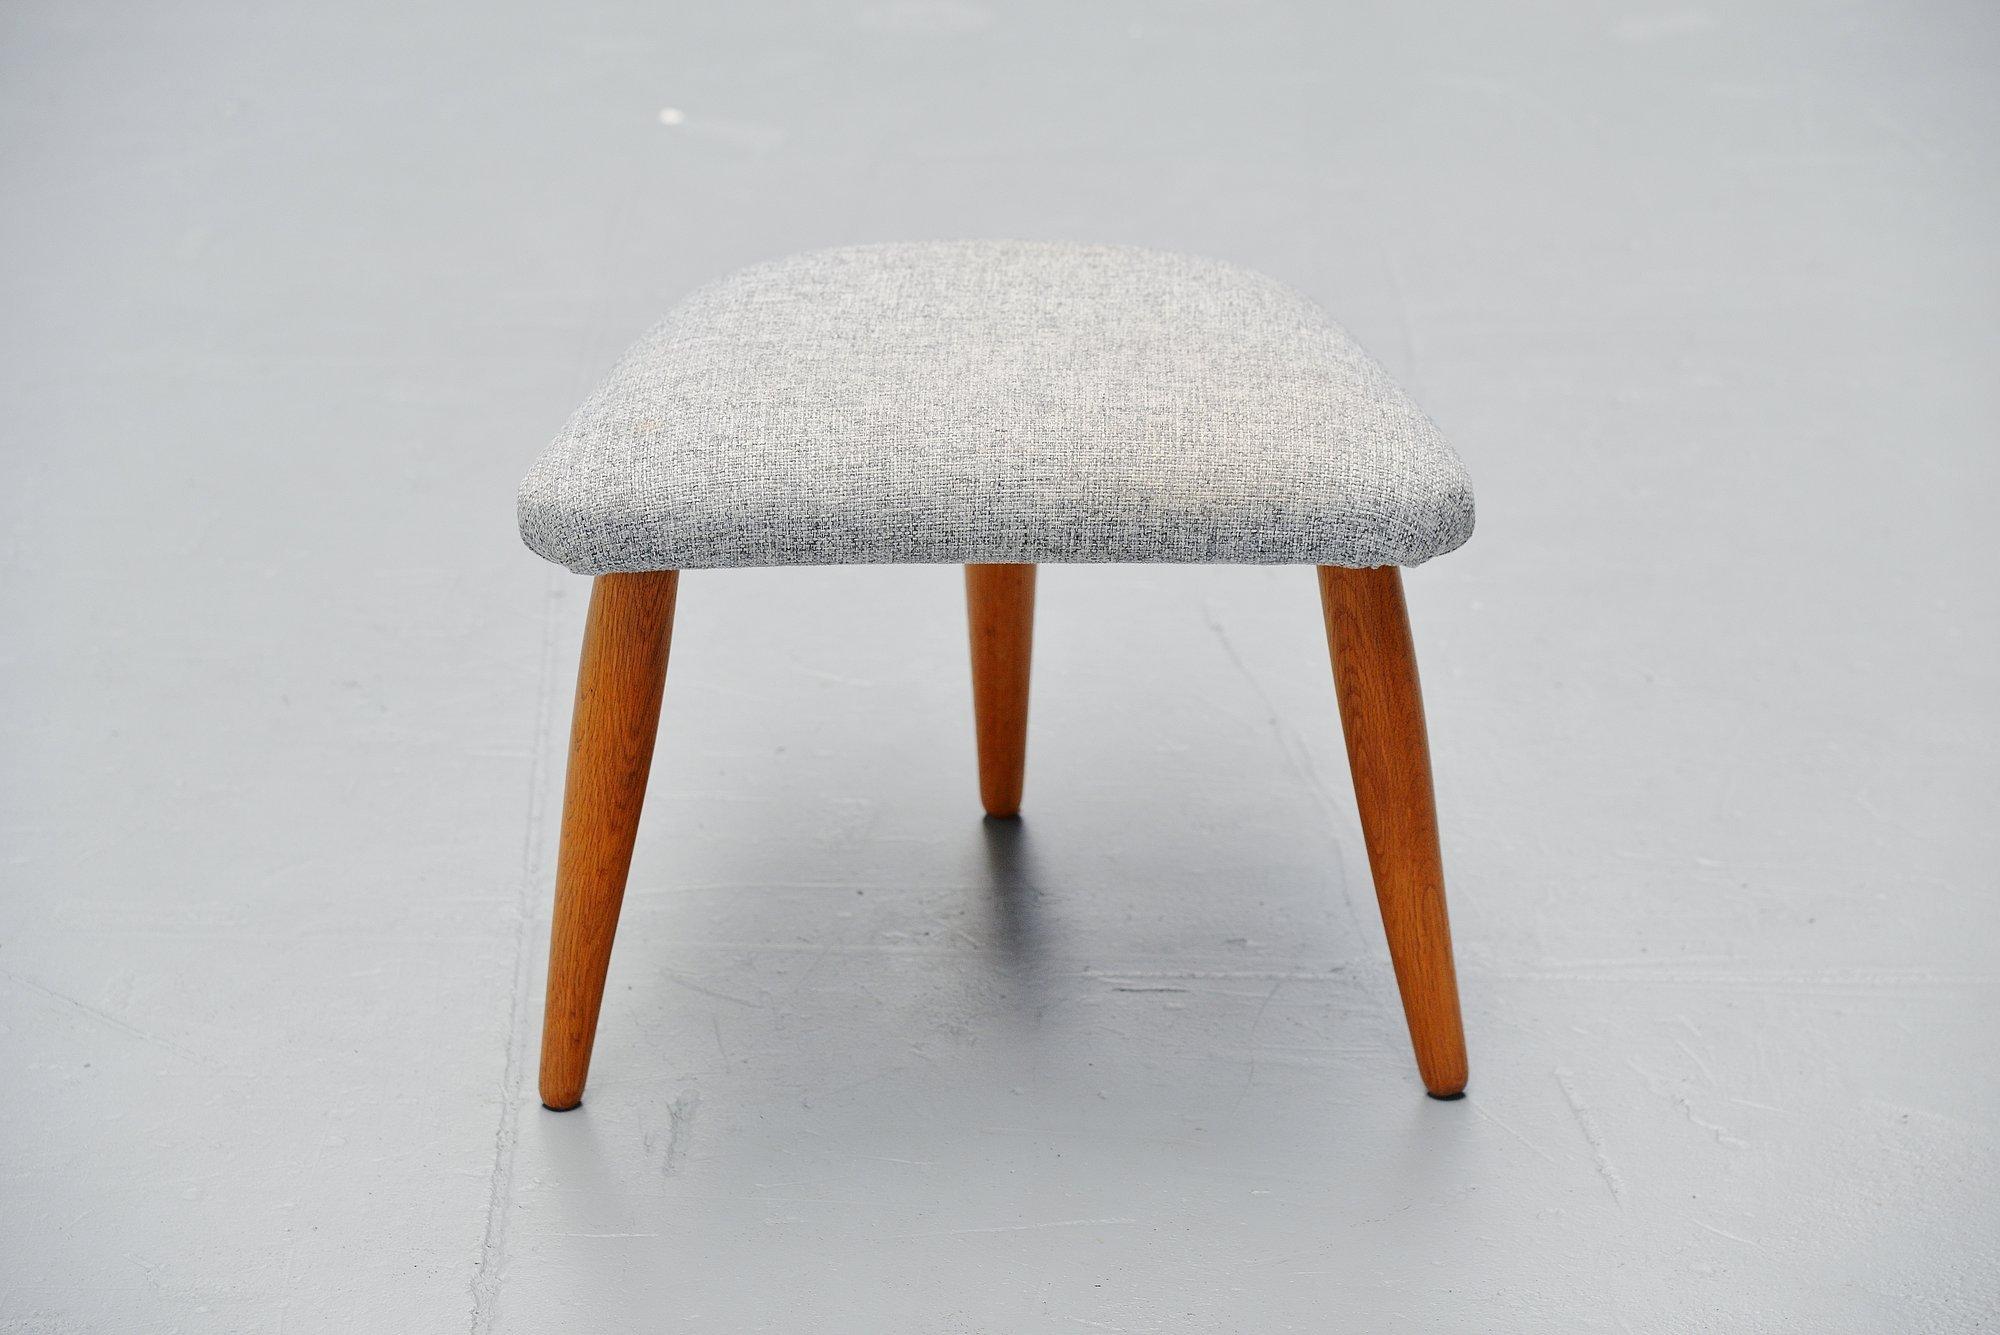 Rare footstool designed by Nanna Ditzel and manufactured by Kolds Savværk, Denmark 1956. This footstool belongs with the Nursing chair designed by Nanna Ditzel and this footstool would finish the chair into perfection. The legs are made of solid oak